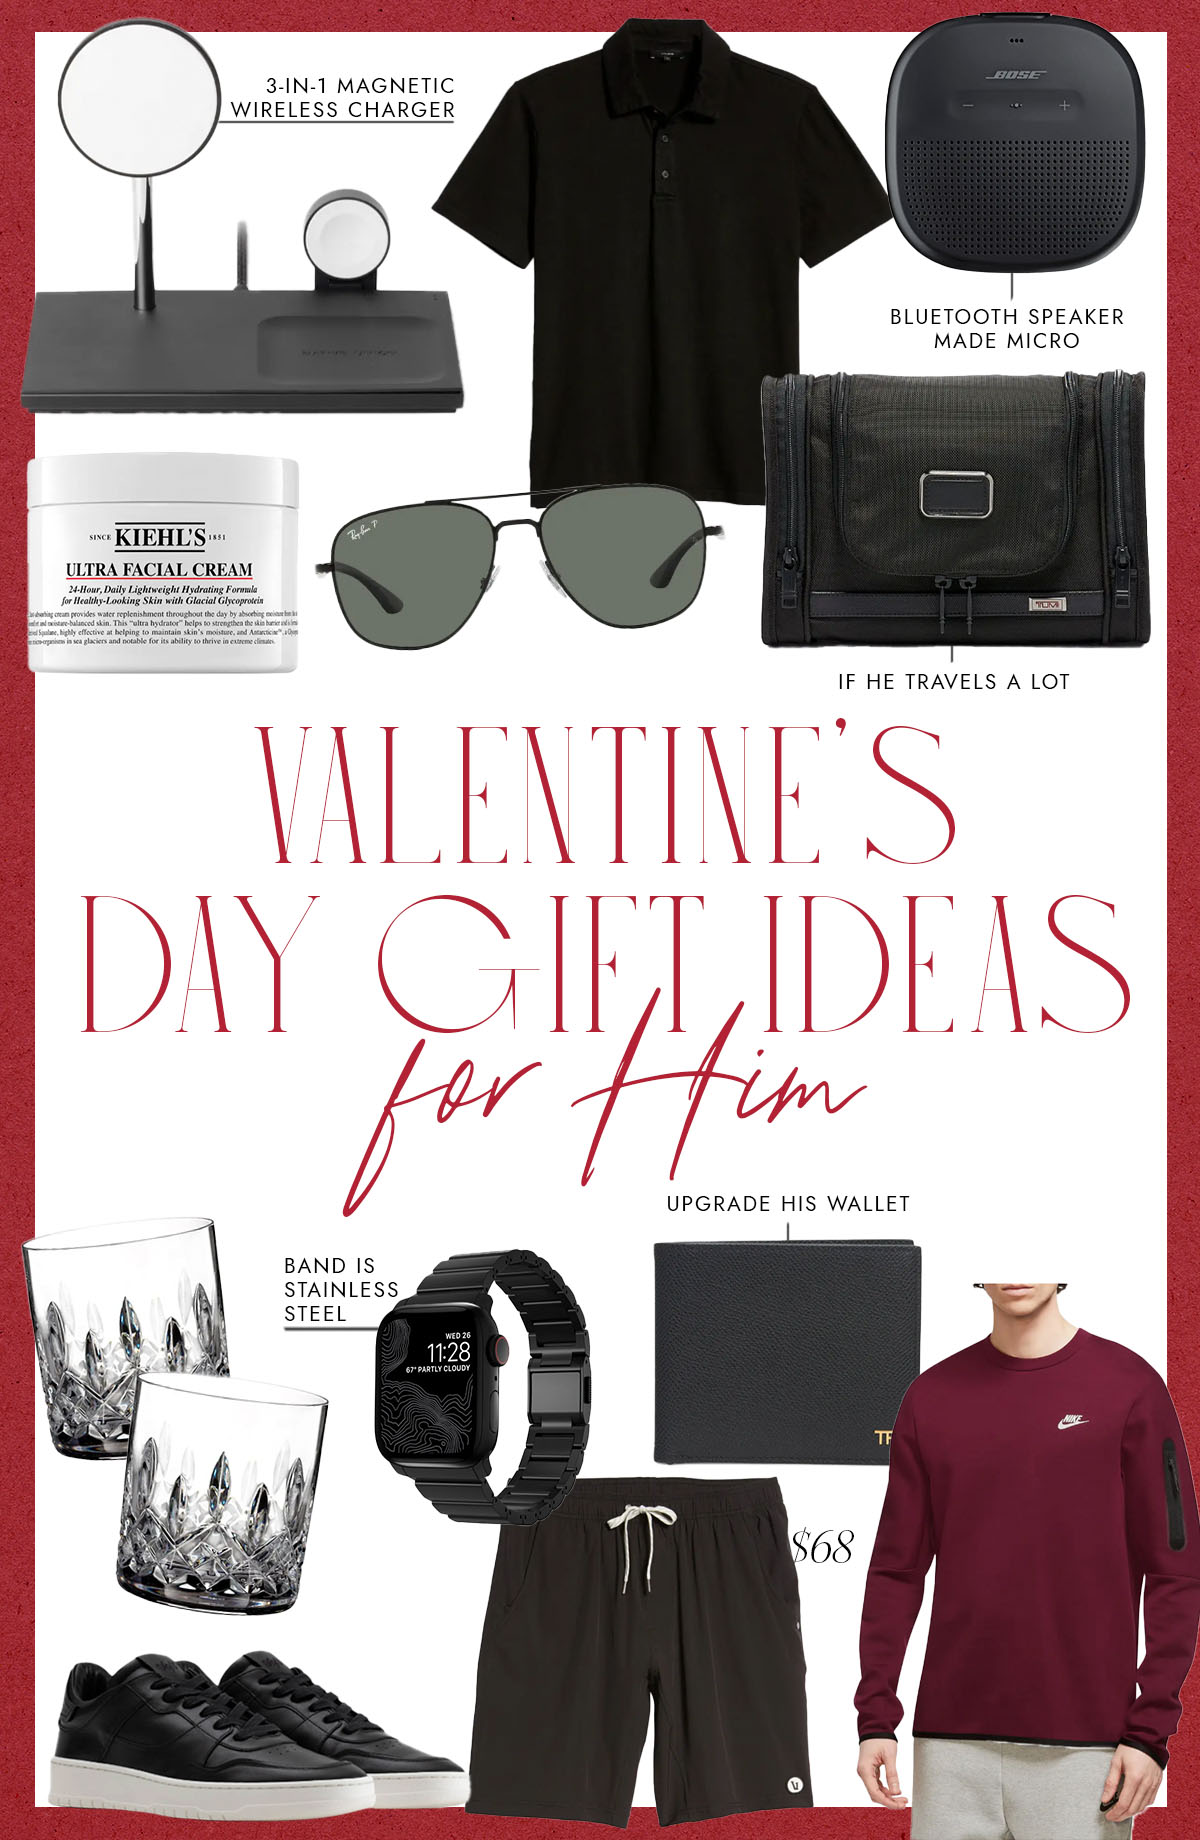 Valentine's Gifts for New Boyfriends - Valentine's Day Gifts for Men